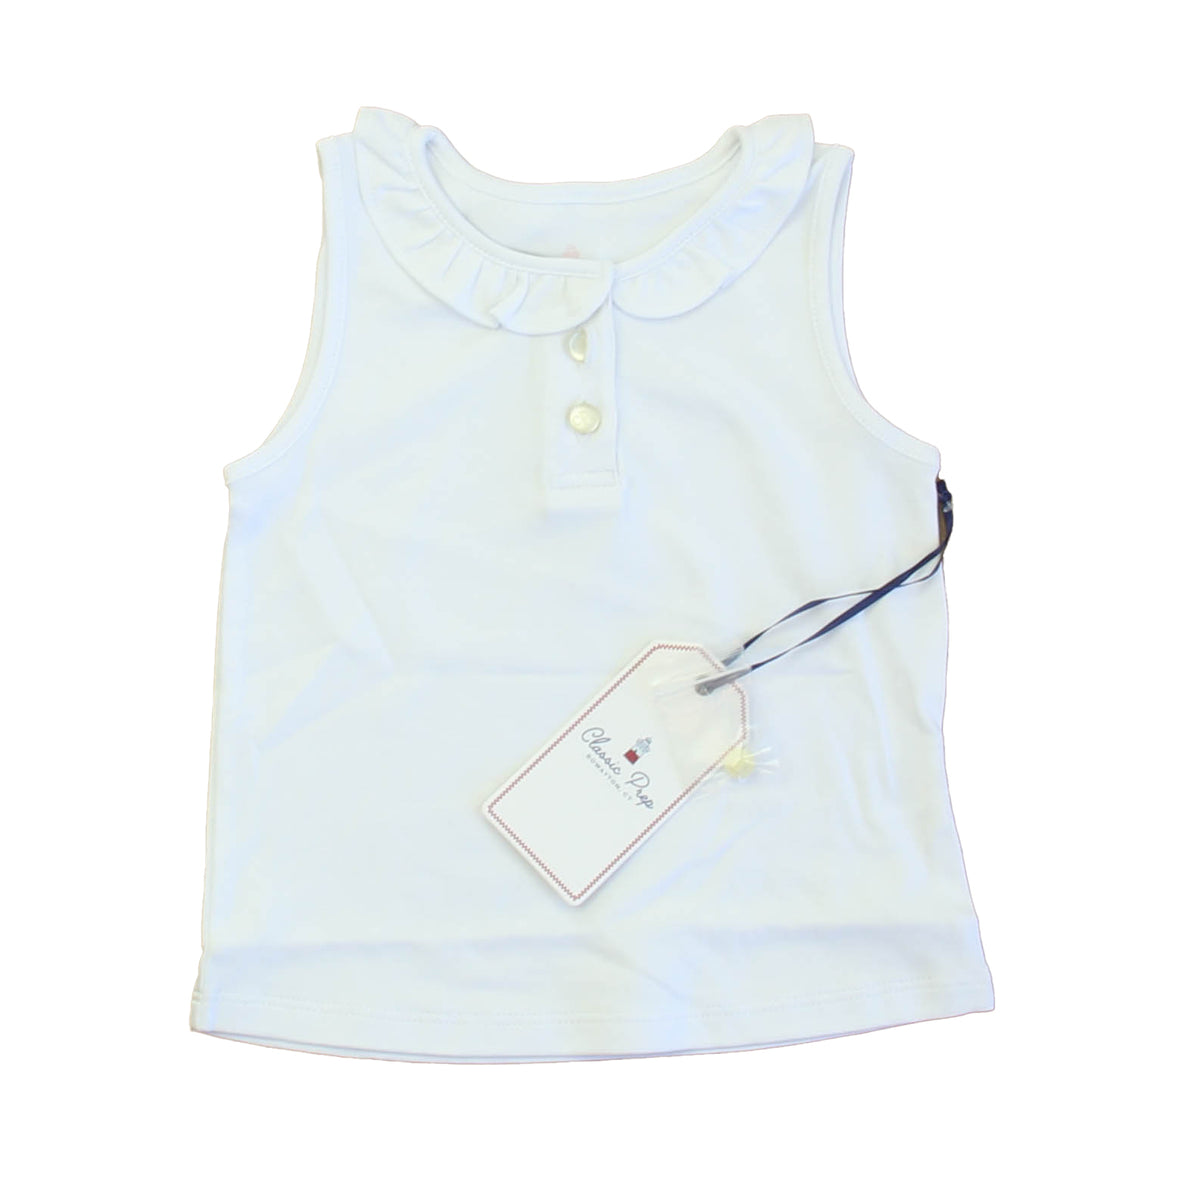 New with Tags: Bright White Top -- FINAL SALE